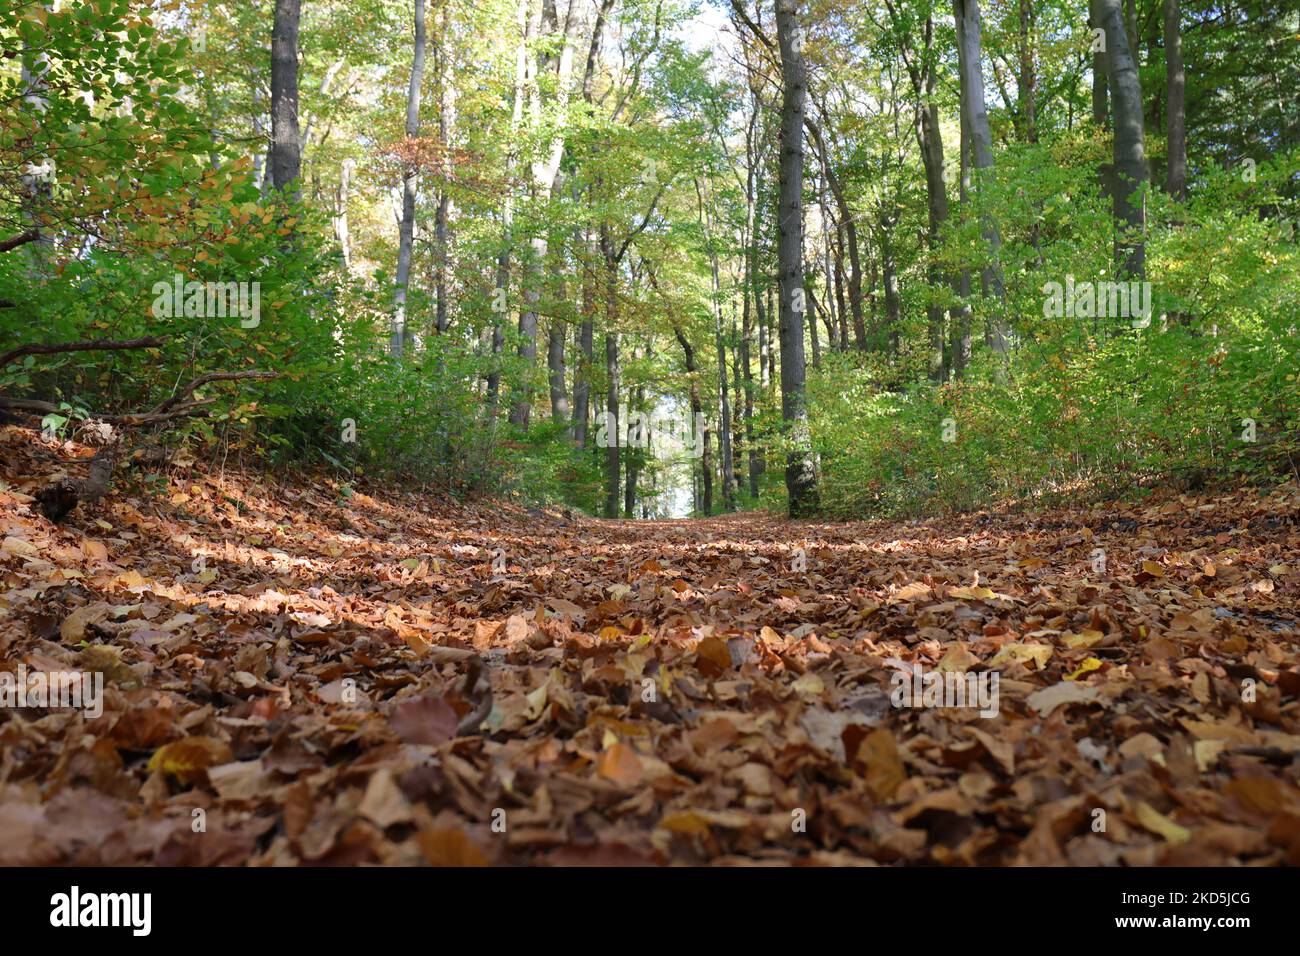 Brown autumn leaves abundantly cover the floor of a forest path in front of still green trees in the background Stock Photo